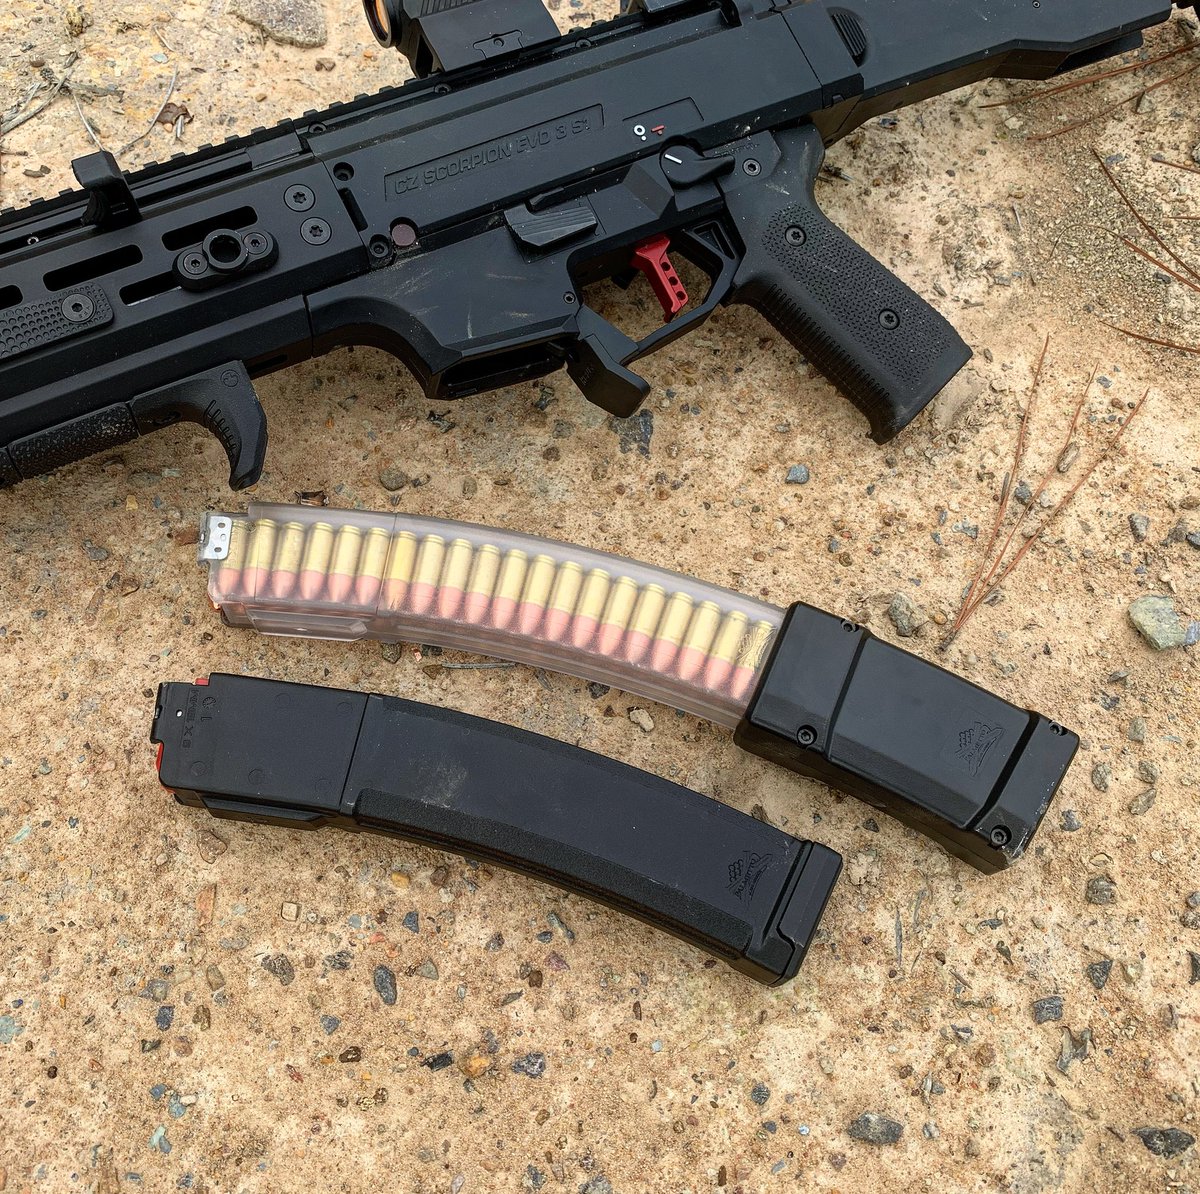 Just wrapped up my review on the new PSA AK-V / CZ Scorpion 15 round mag ex...